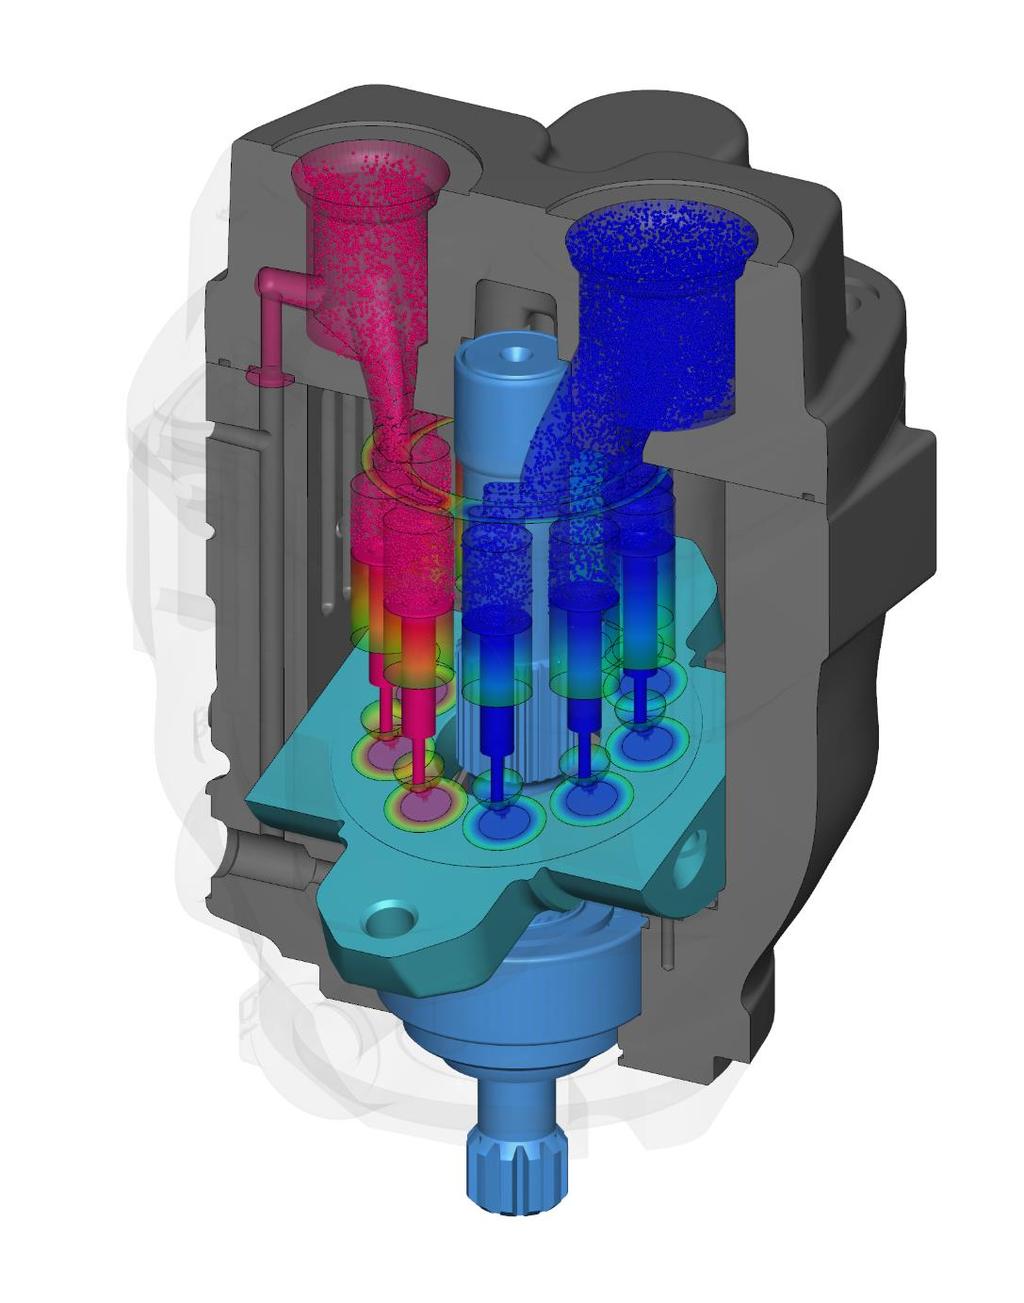 ASSESSING THE OPPORTUNITY CFD Market Expanding for two major reasons, among many others: Fluids Volume Modeling (solid model negative) expands CFD simulation to broader market and more design studies